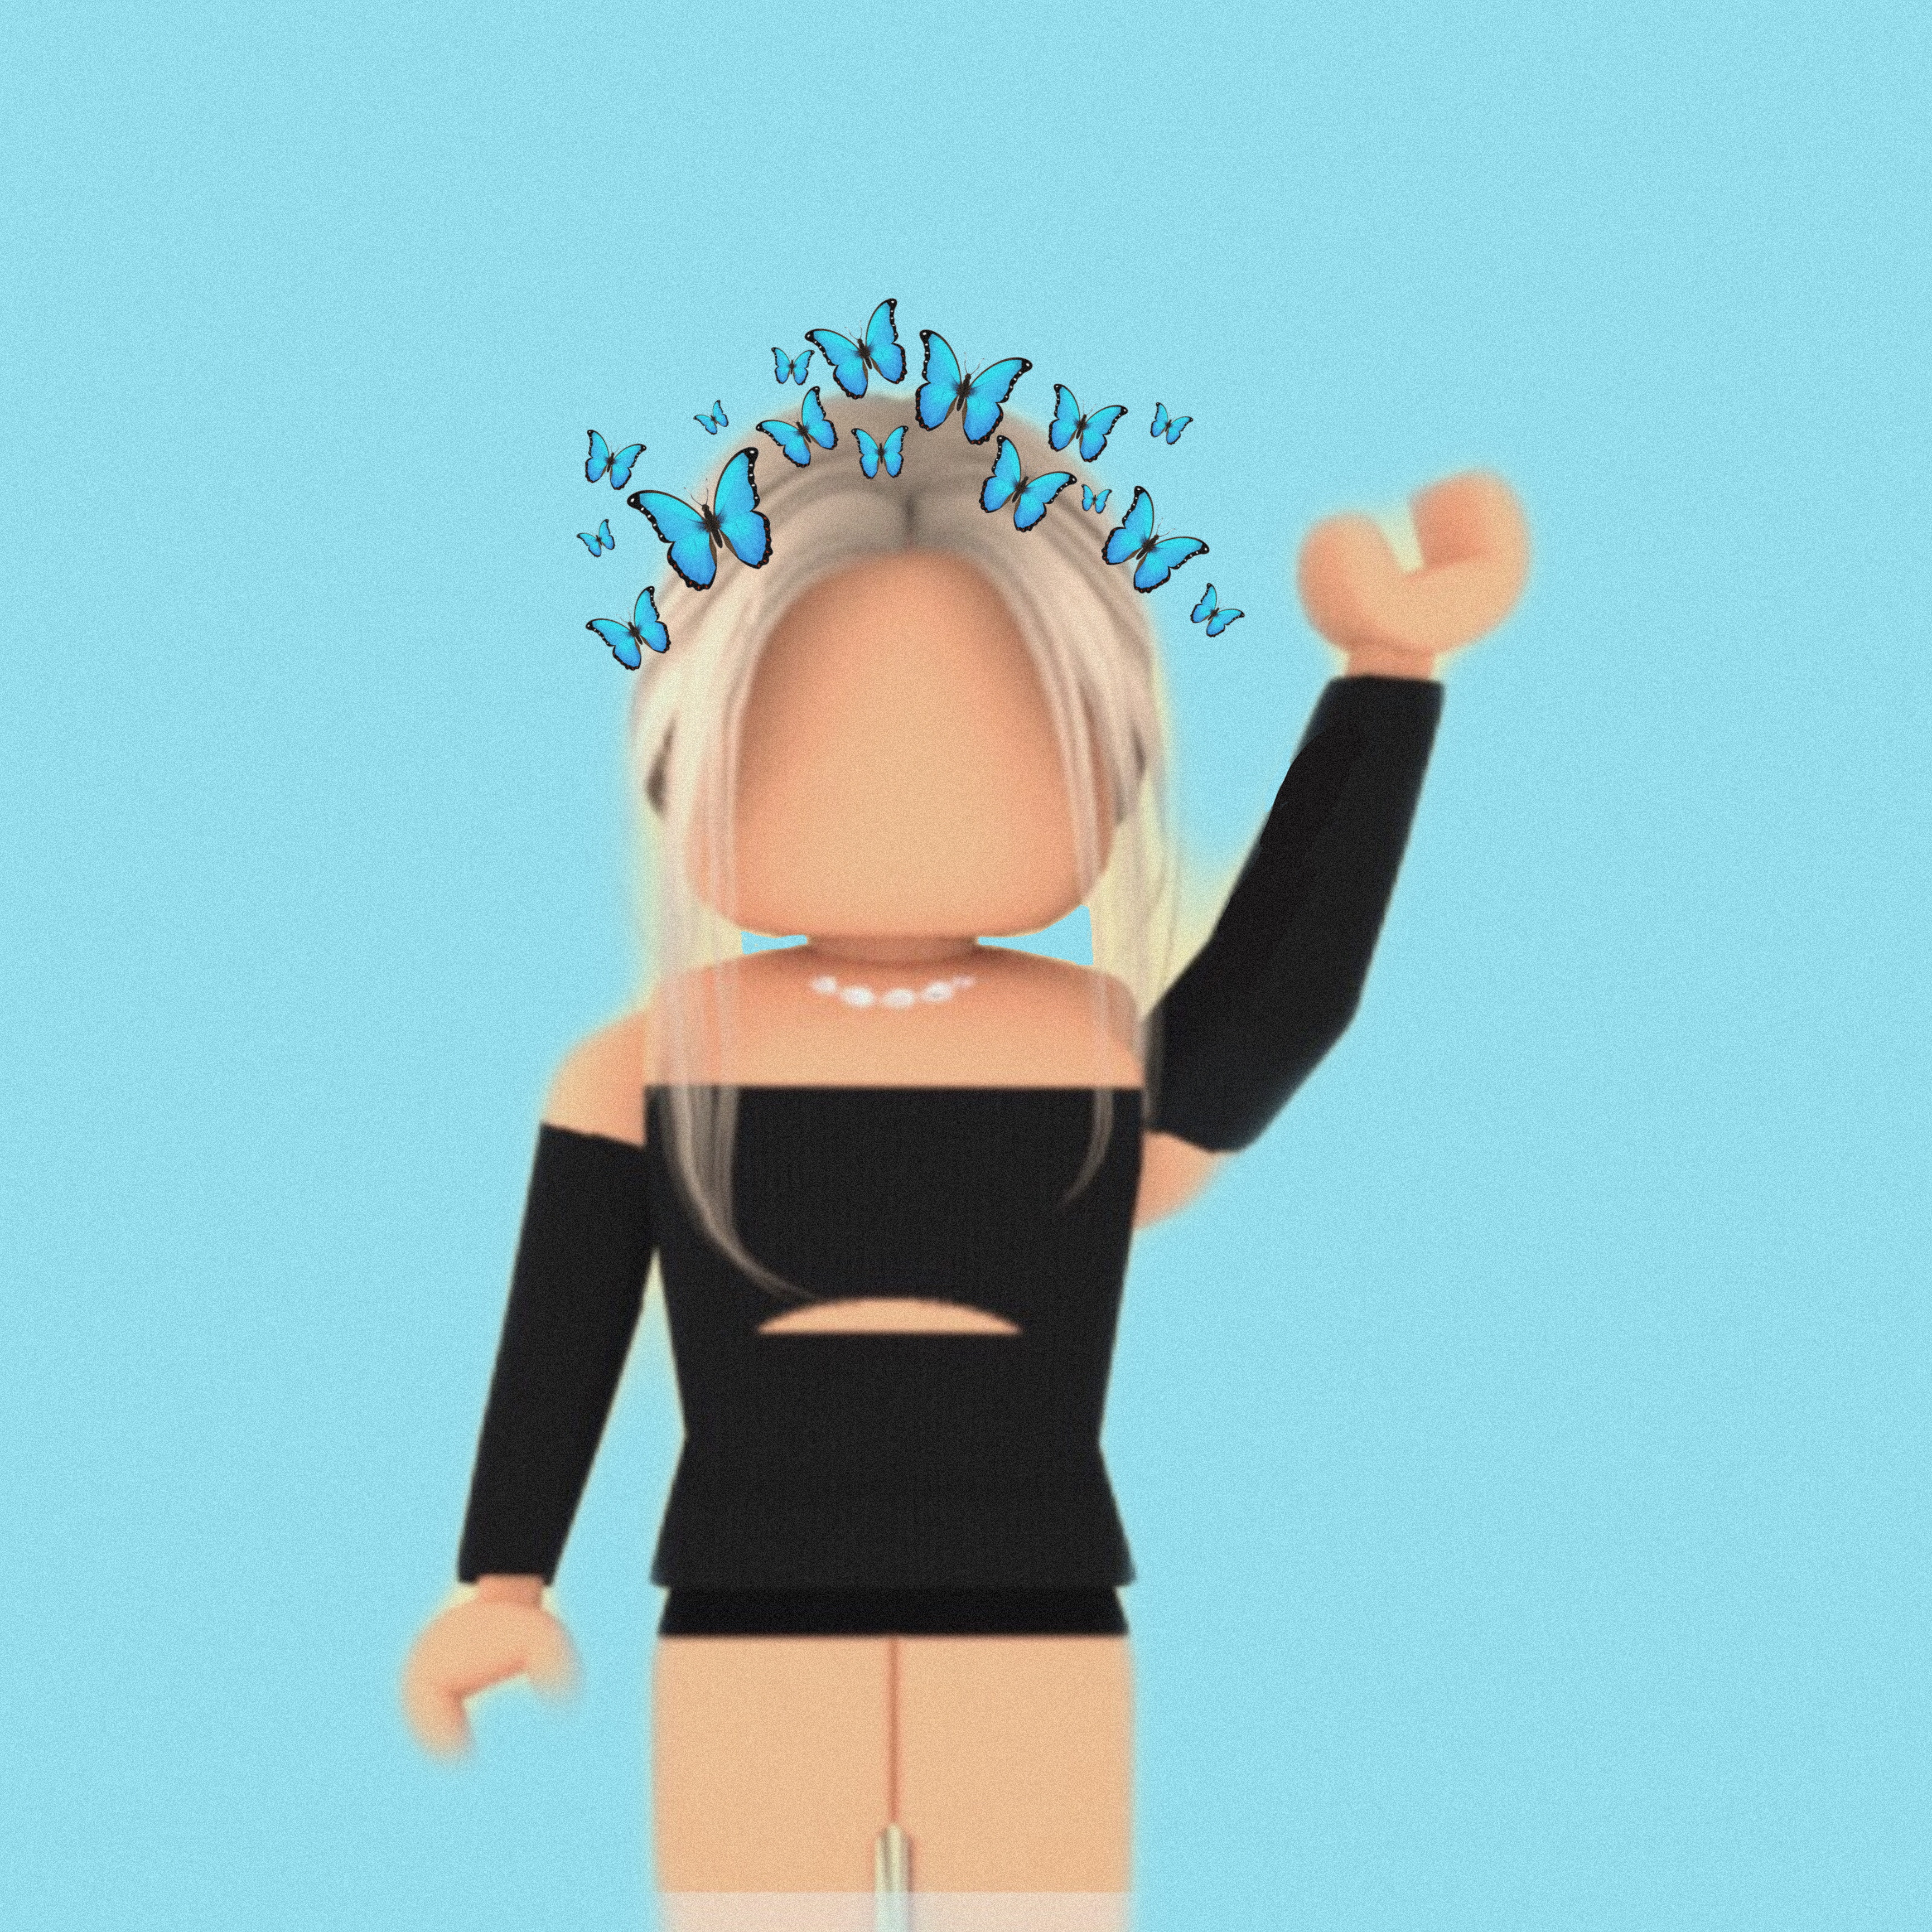 Roblox Girl Butterflies Image By Emmie - roblox blue